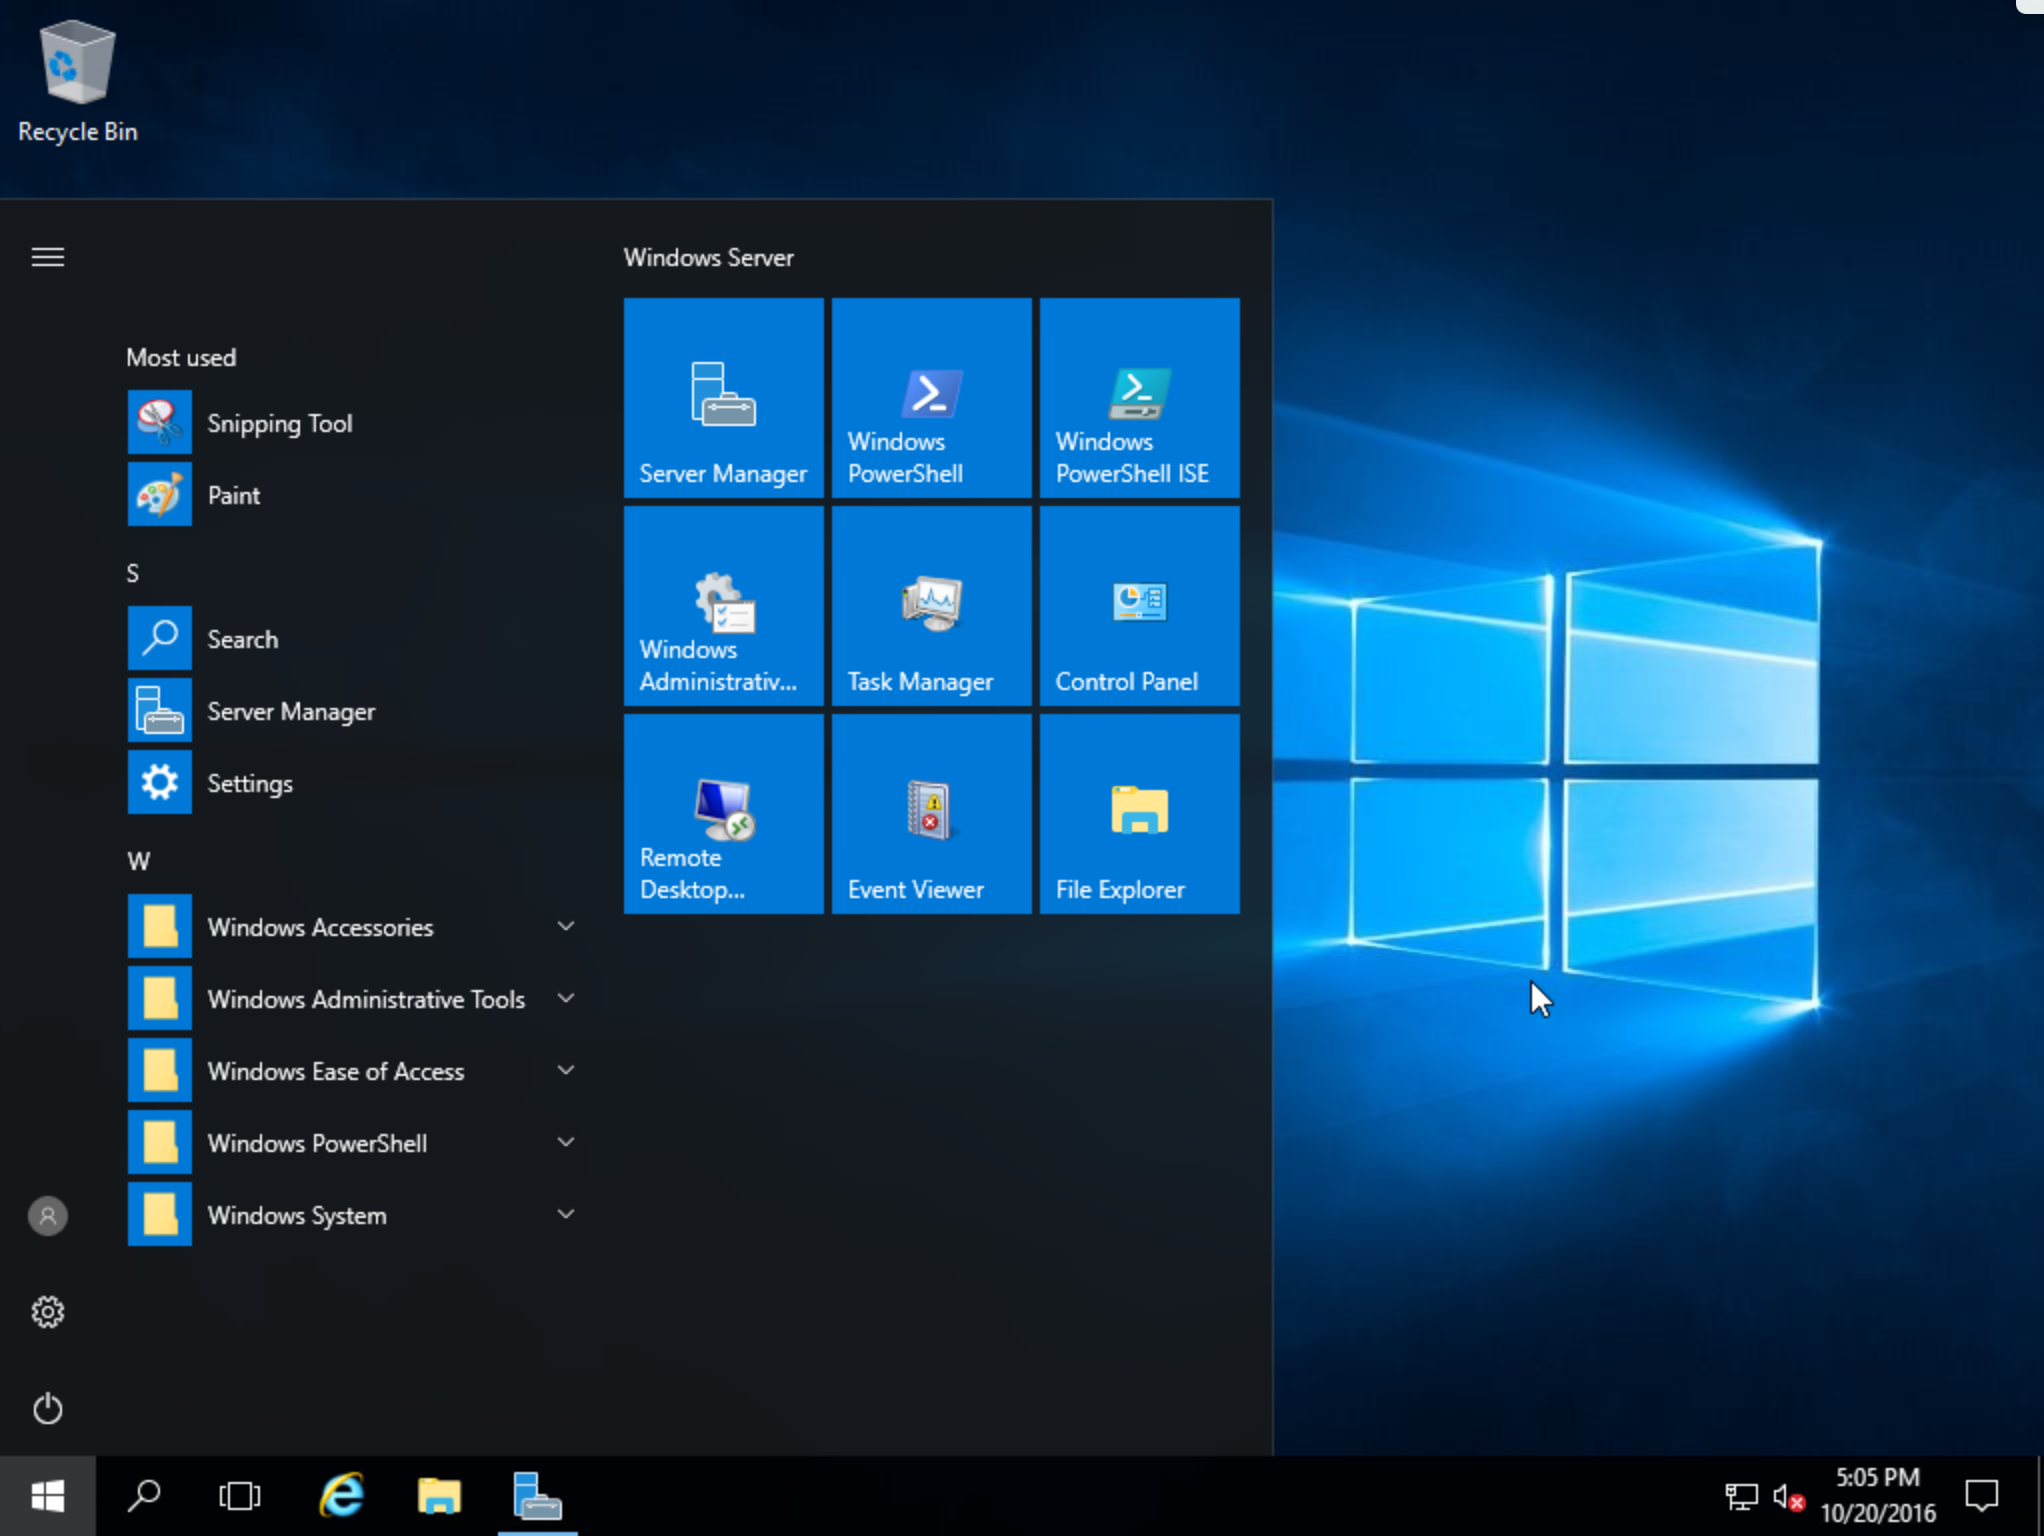 open sound control panel in windows 10